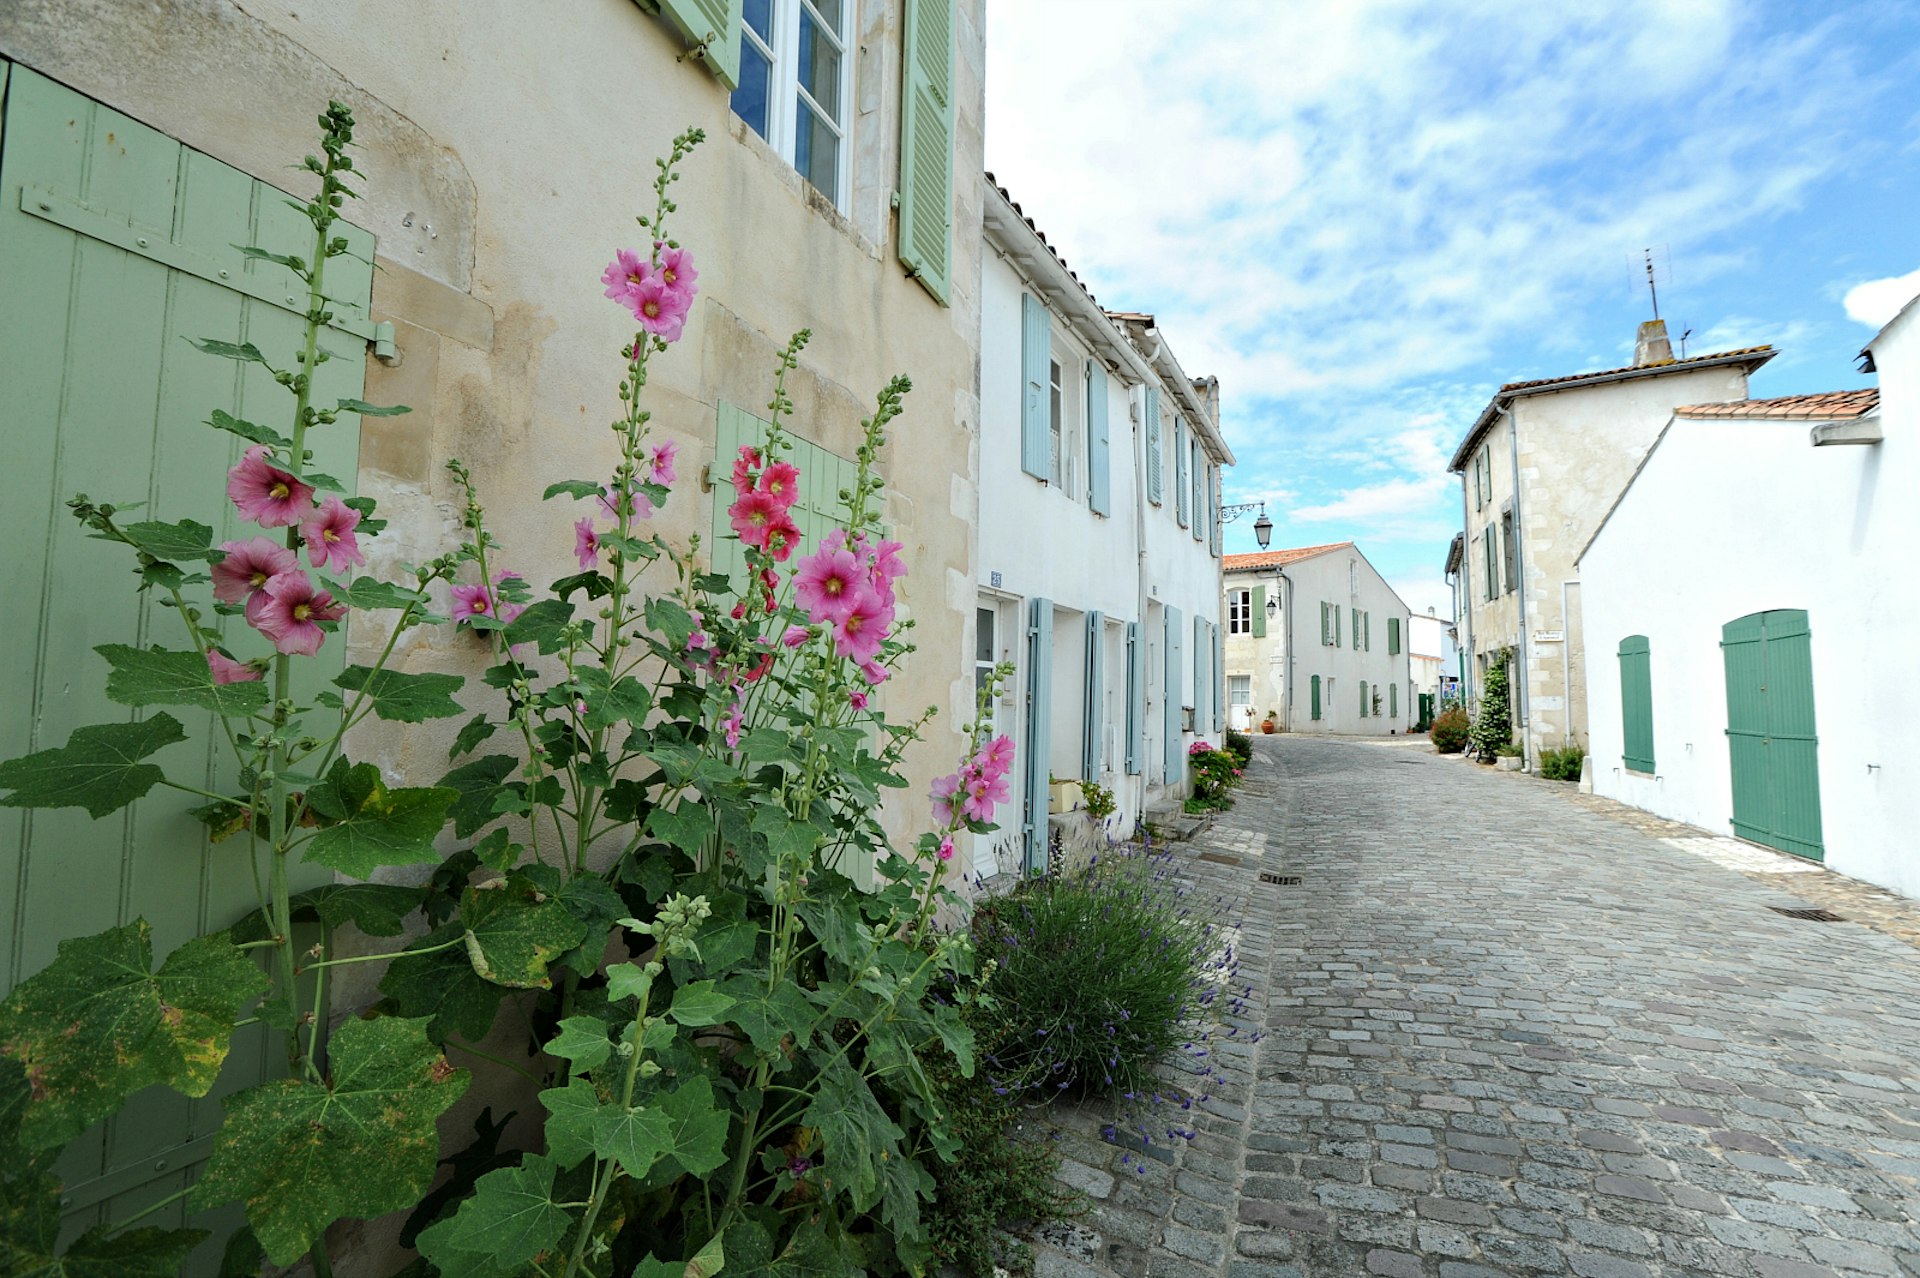 Lavender and hollyhocks along a cobbled lane in St-Martin-de-Ré, next to white and stone houses with pastel-coloured shutters.